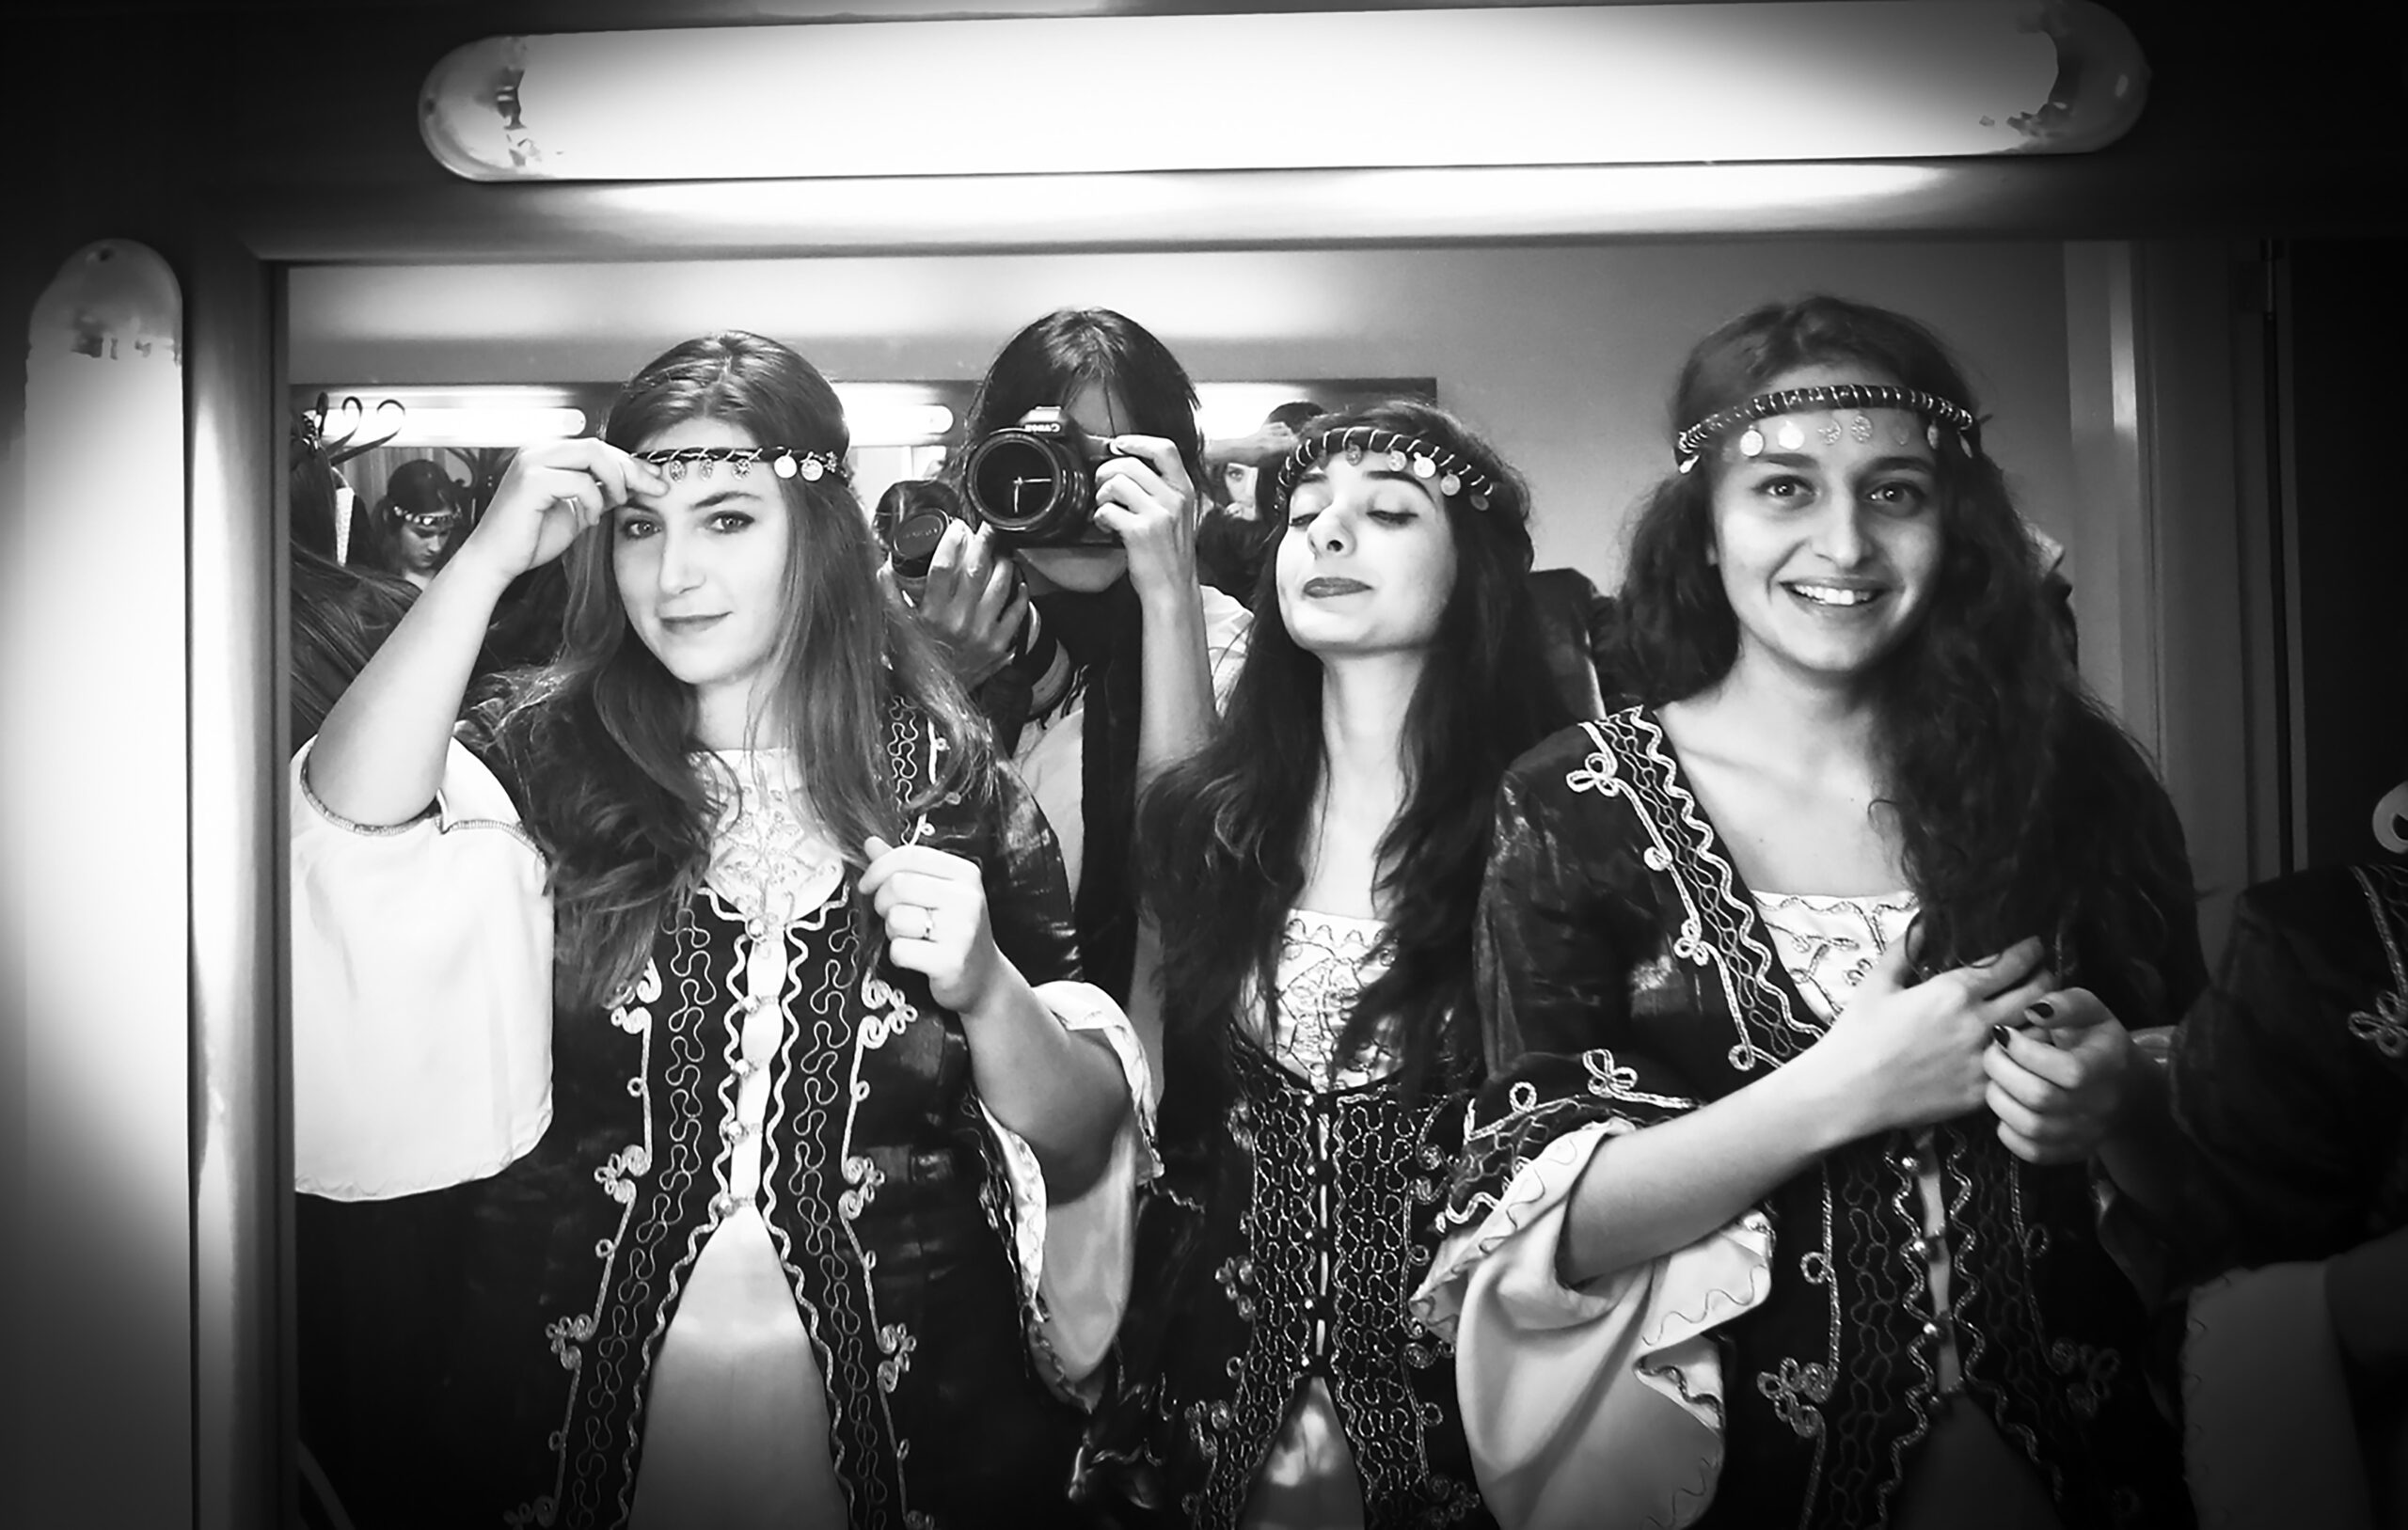 Gülüm İmrat, Turkey: I’m The Photographer, 2013, Boğaziçi Caz Korosu, Turkey - A scene from the backstage of choir singers who are preparing to take the stage before a special concert.